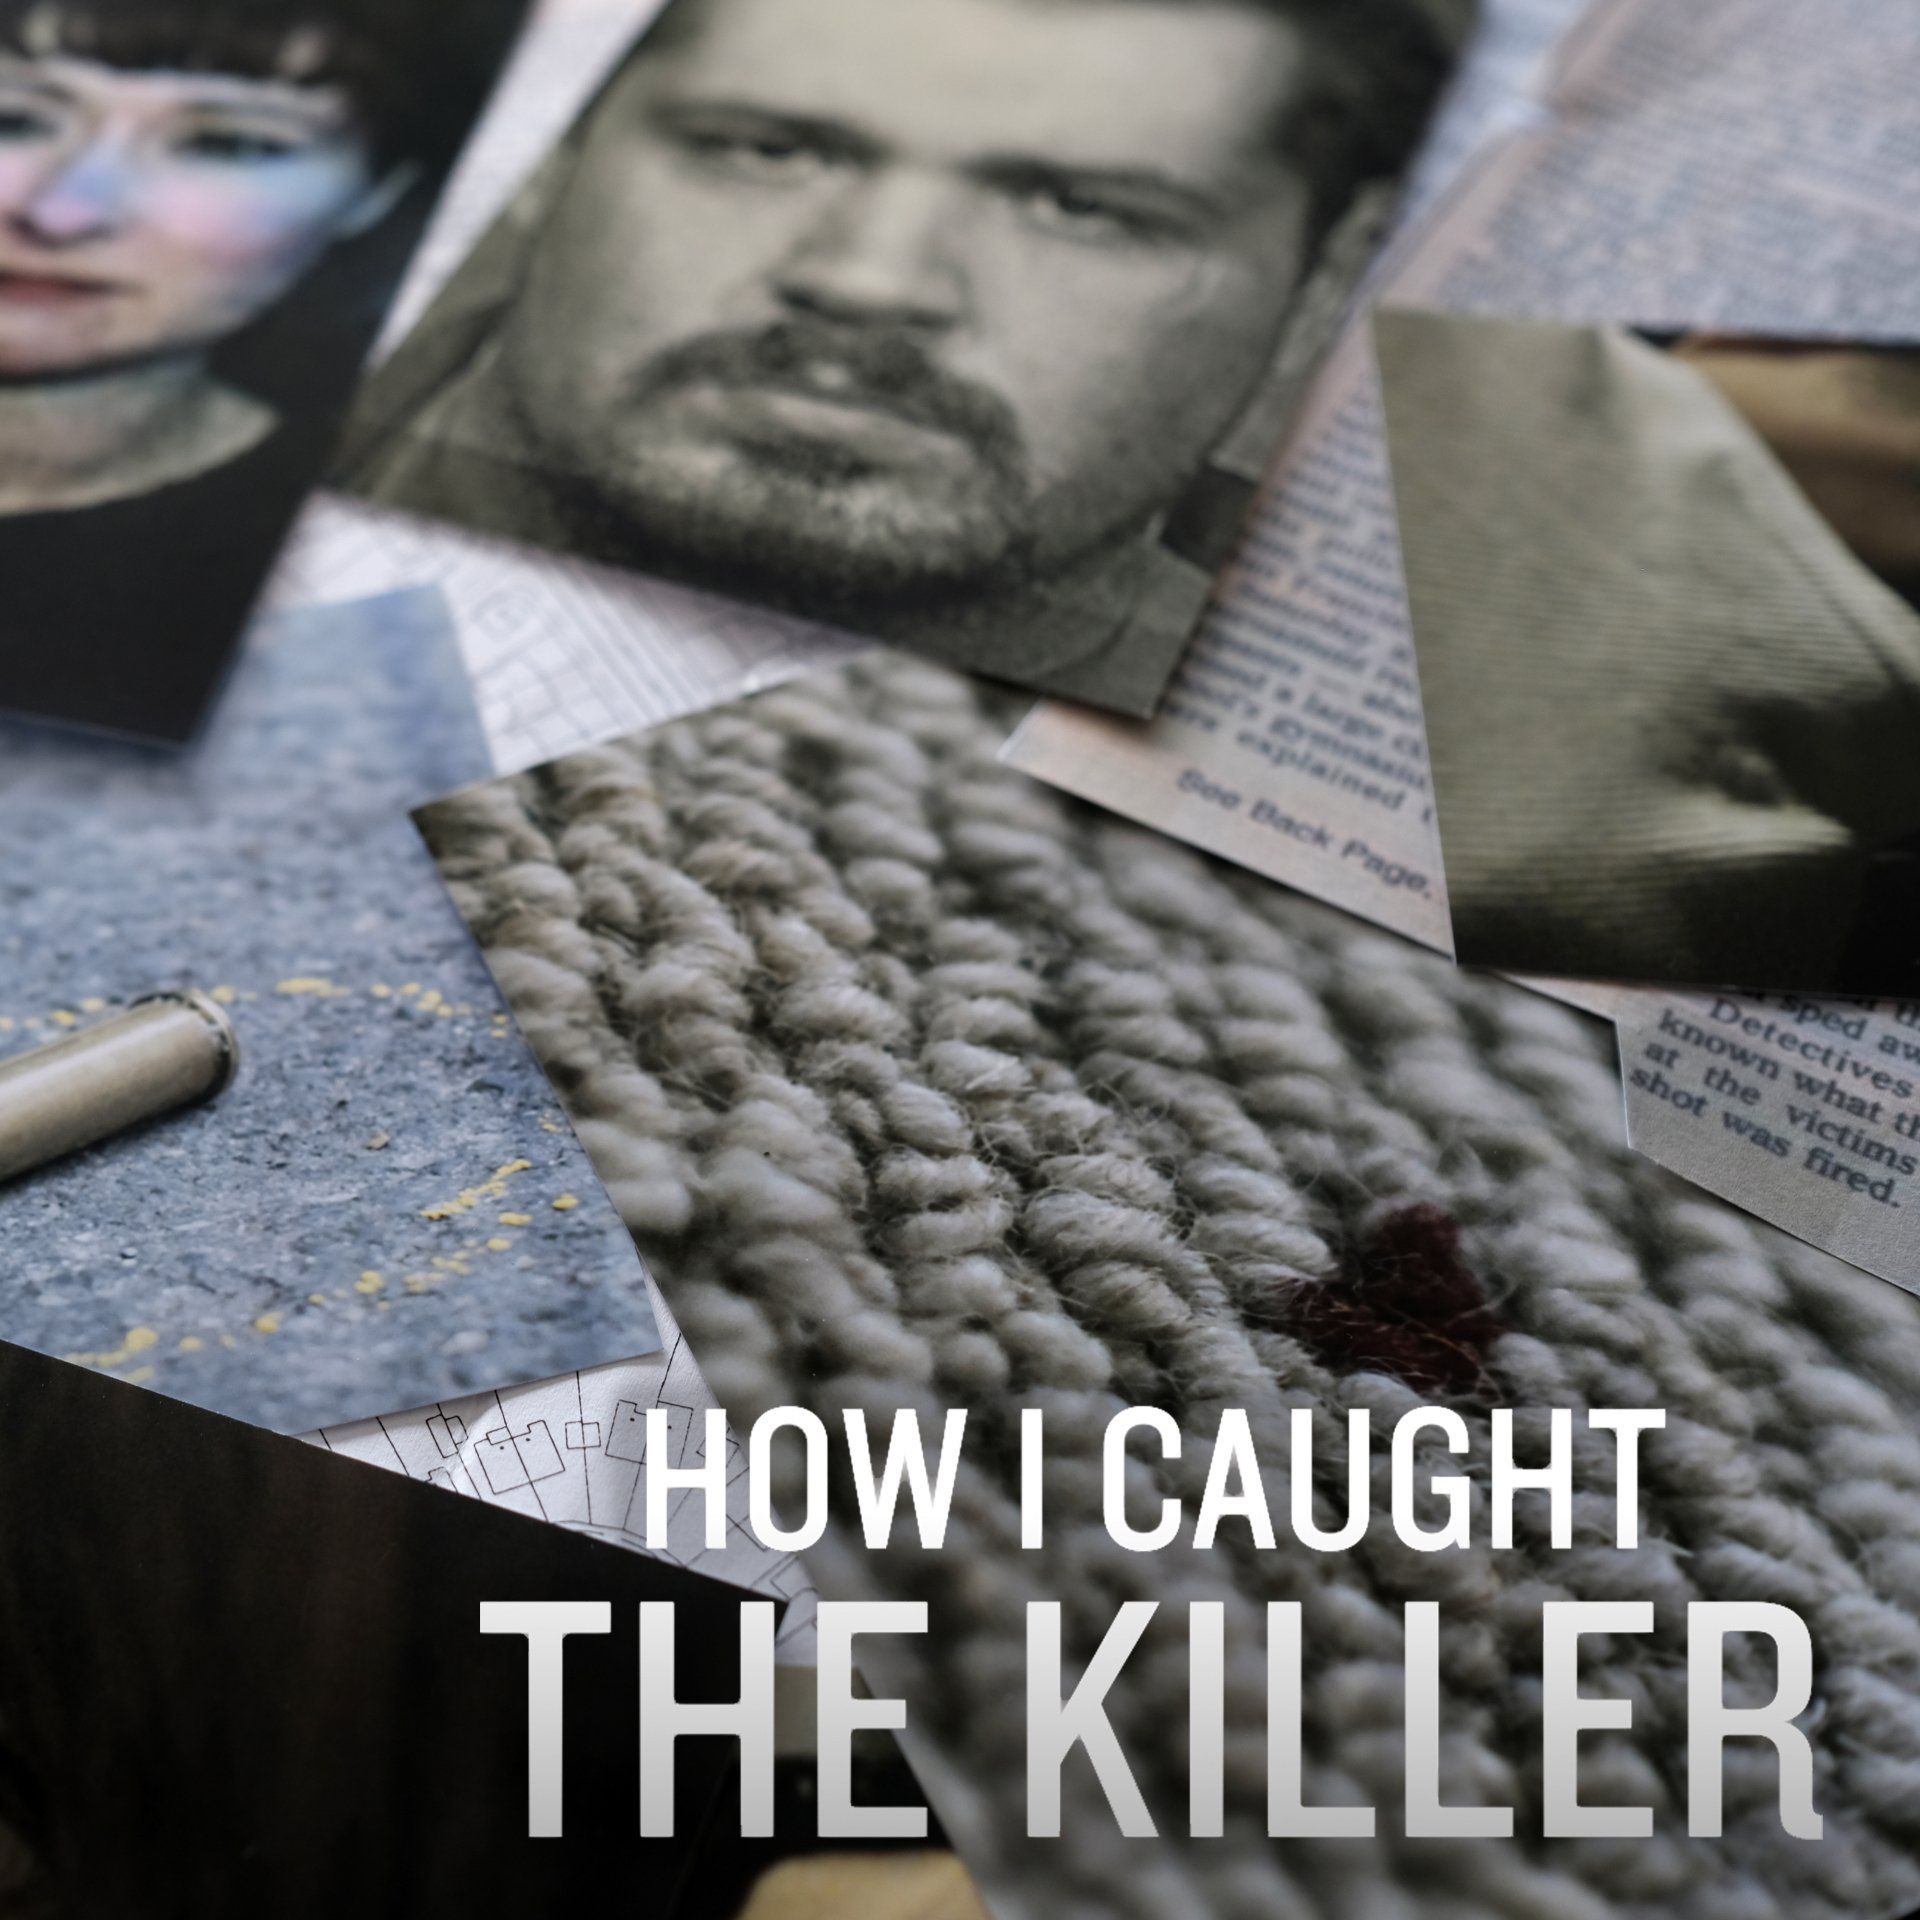 How I caught the killer from Woodcut Media will be on the live stage at CrimeCon